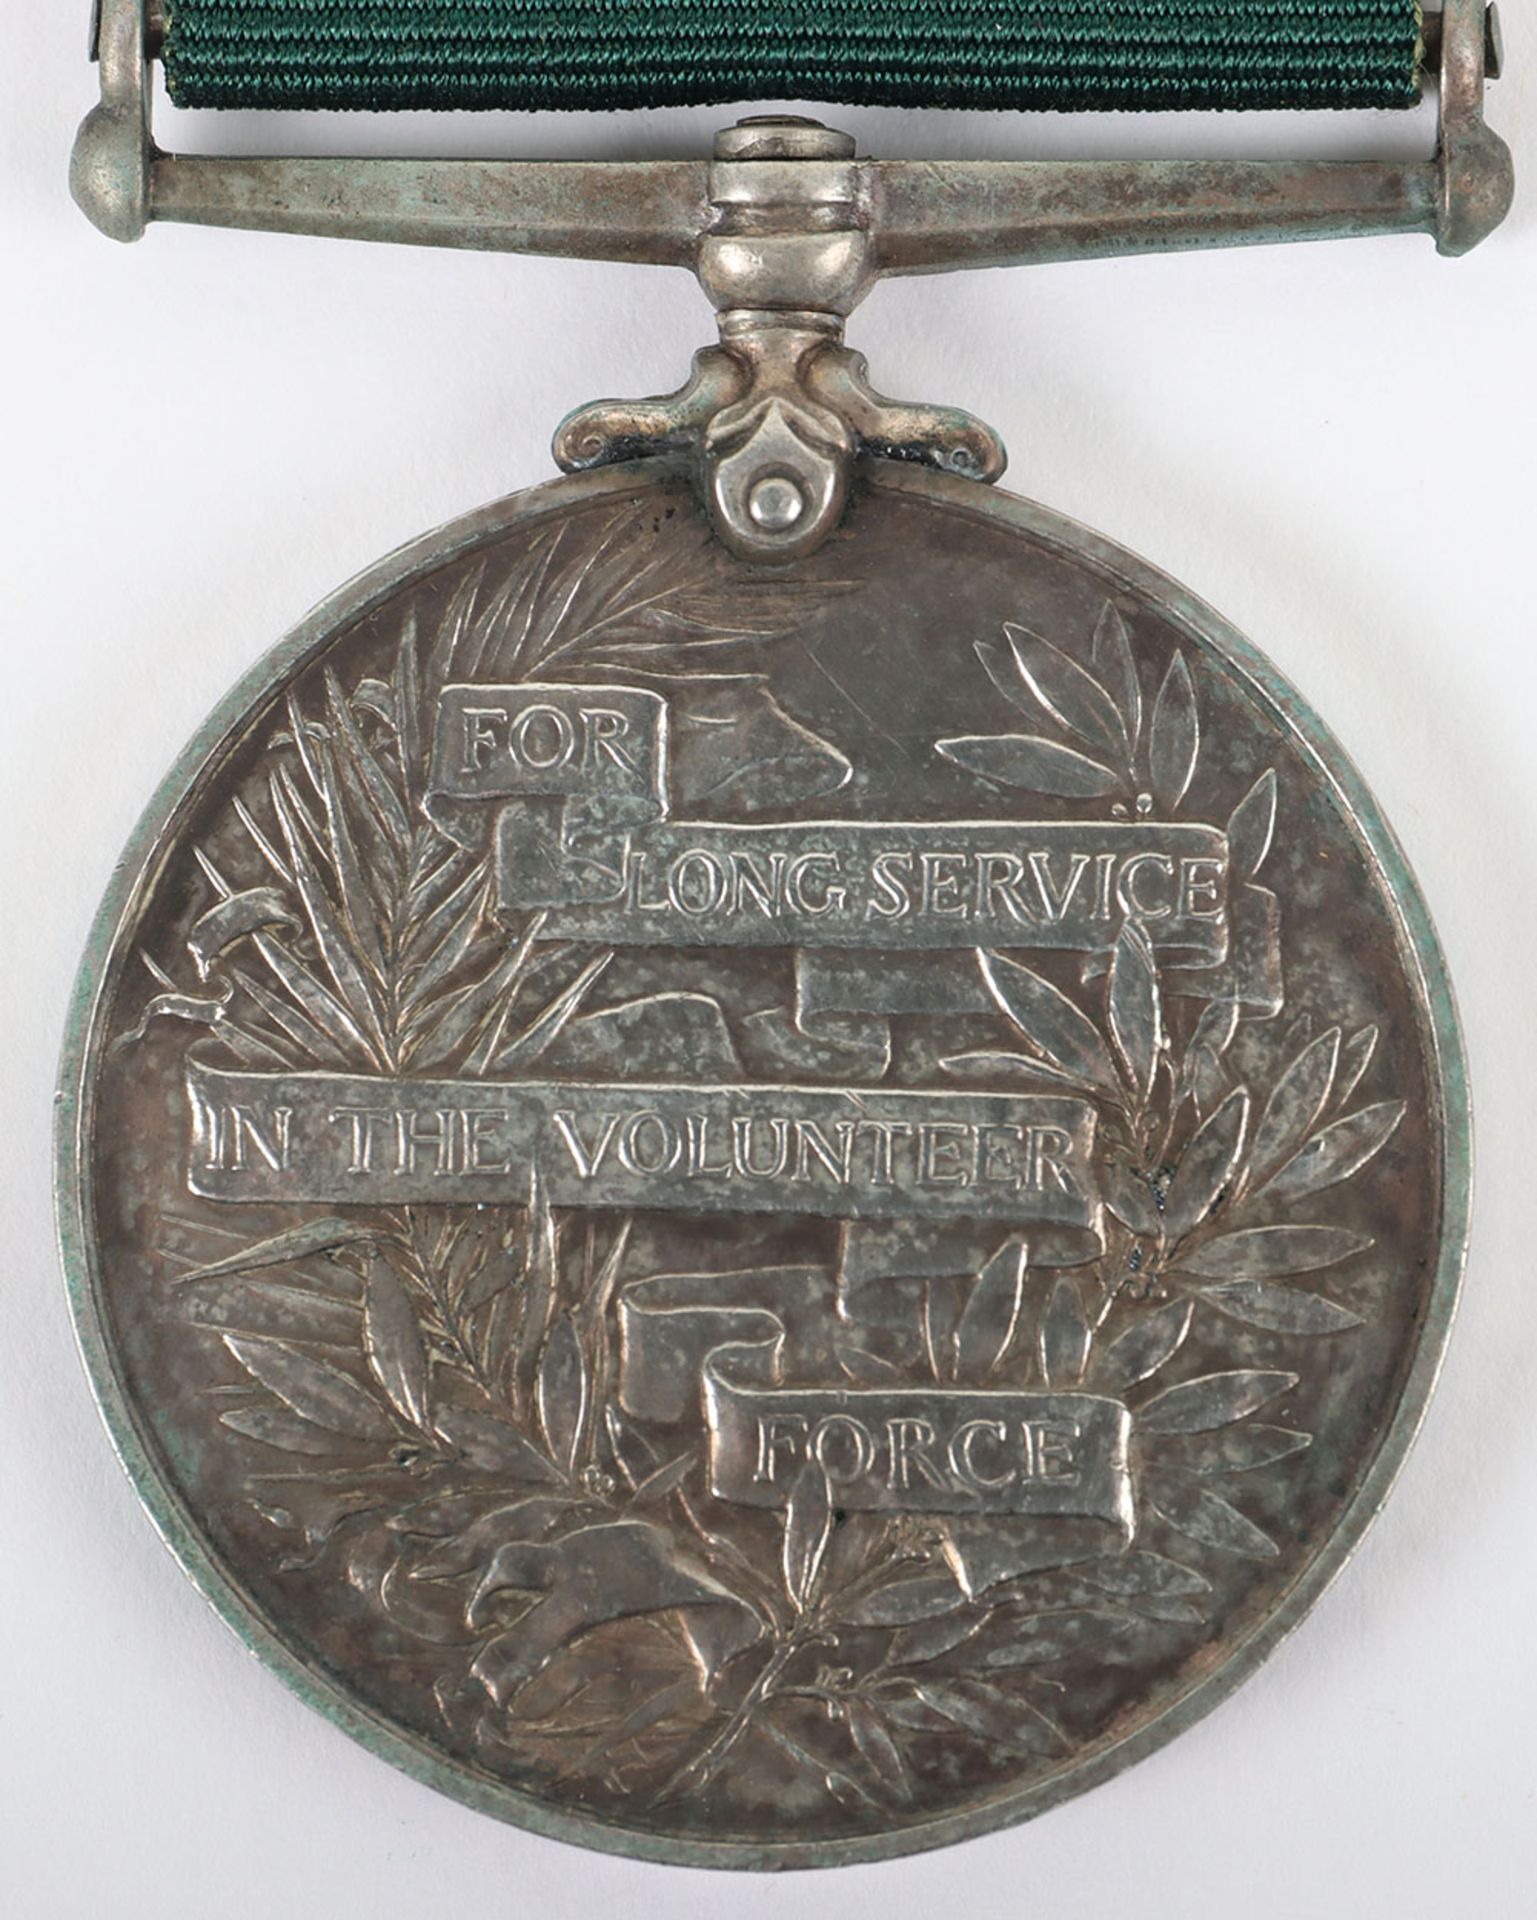 Edwardian Volunteer Long Service Medal to a Bugler in the 2nd Middlesex Volunteer Rifle Company - Image 4 of 5